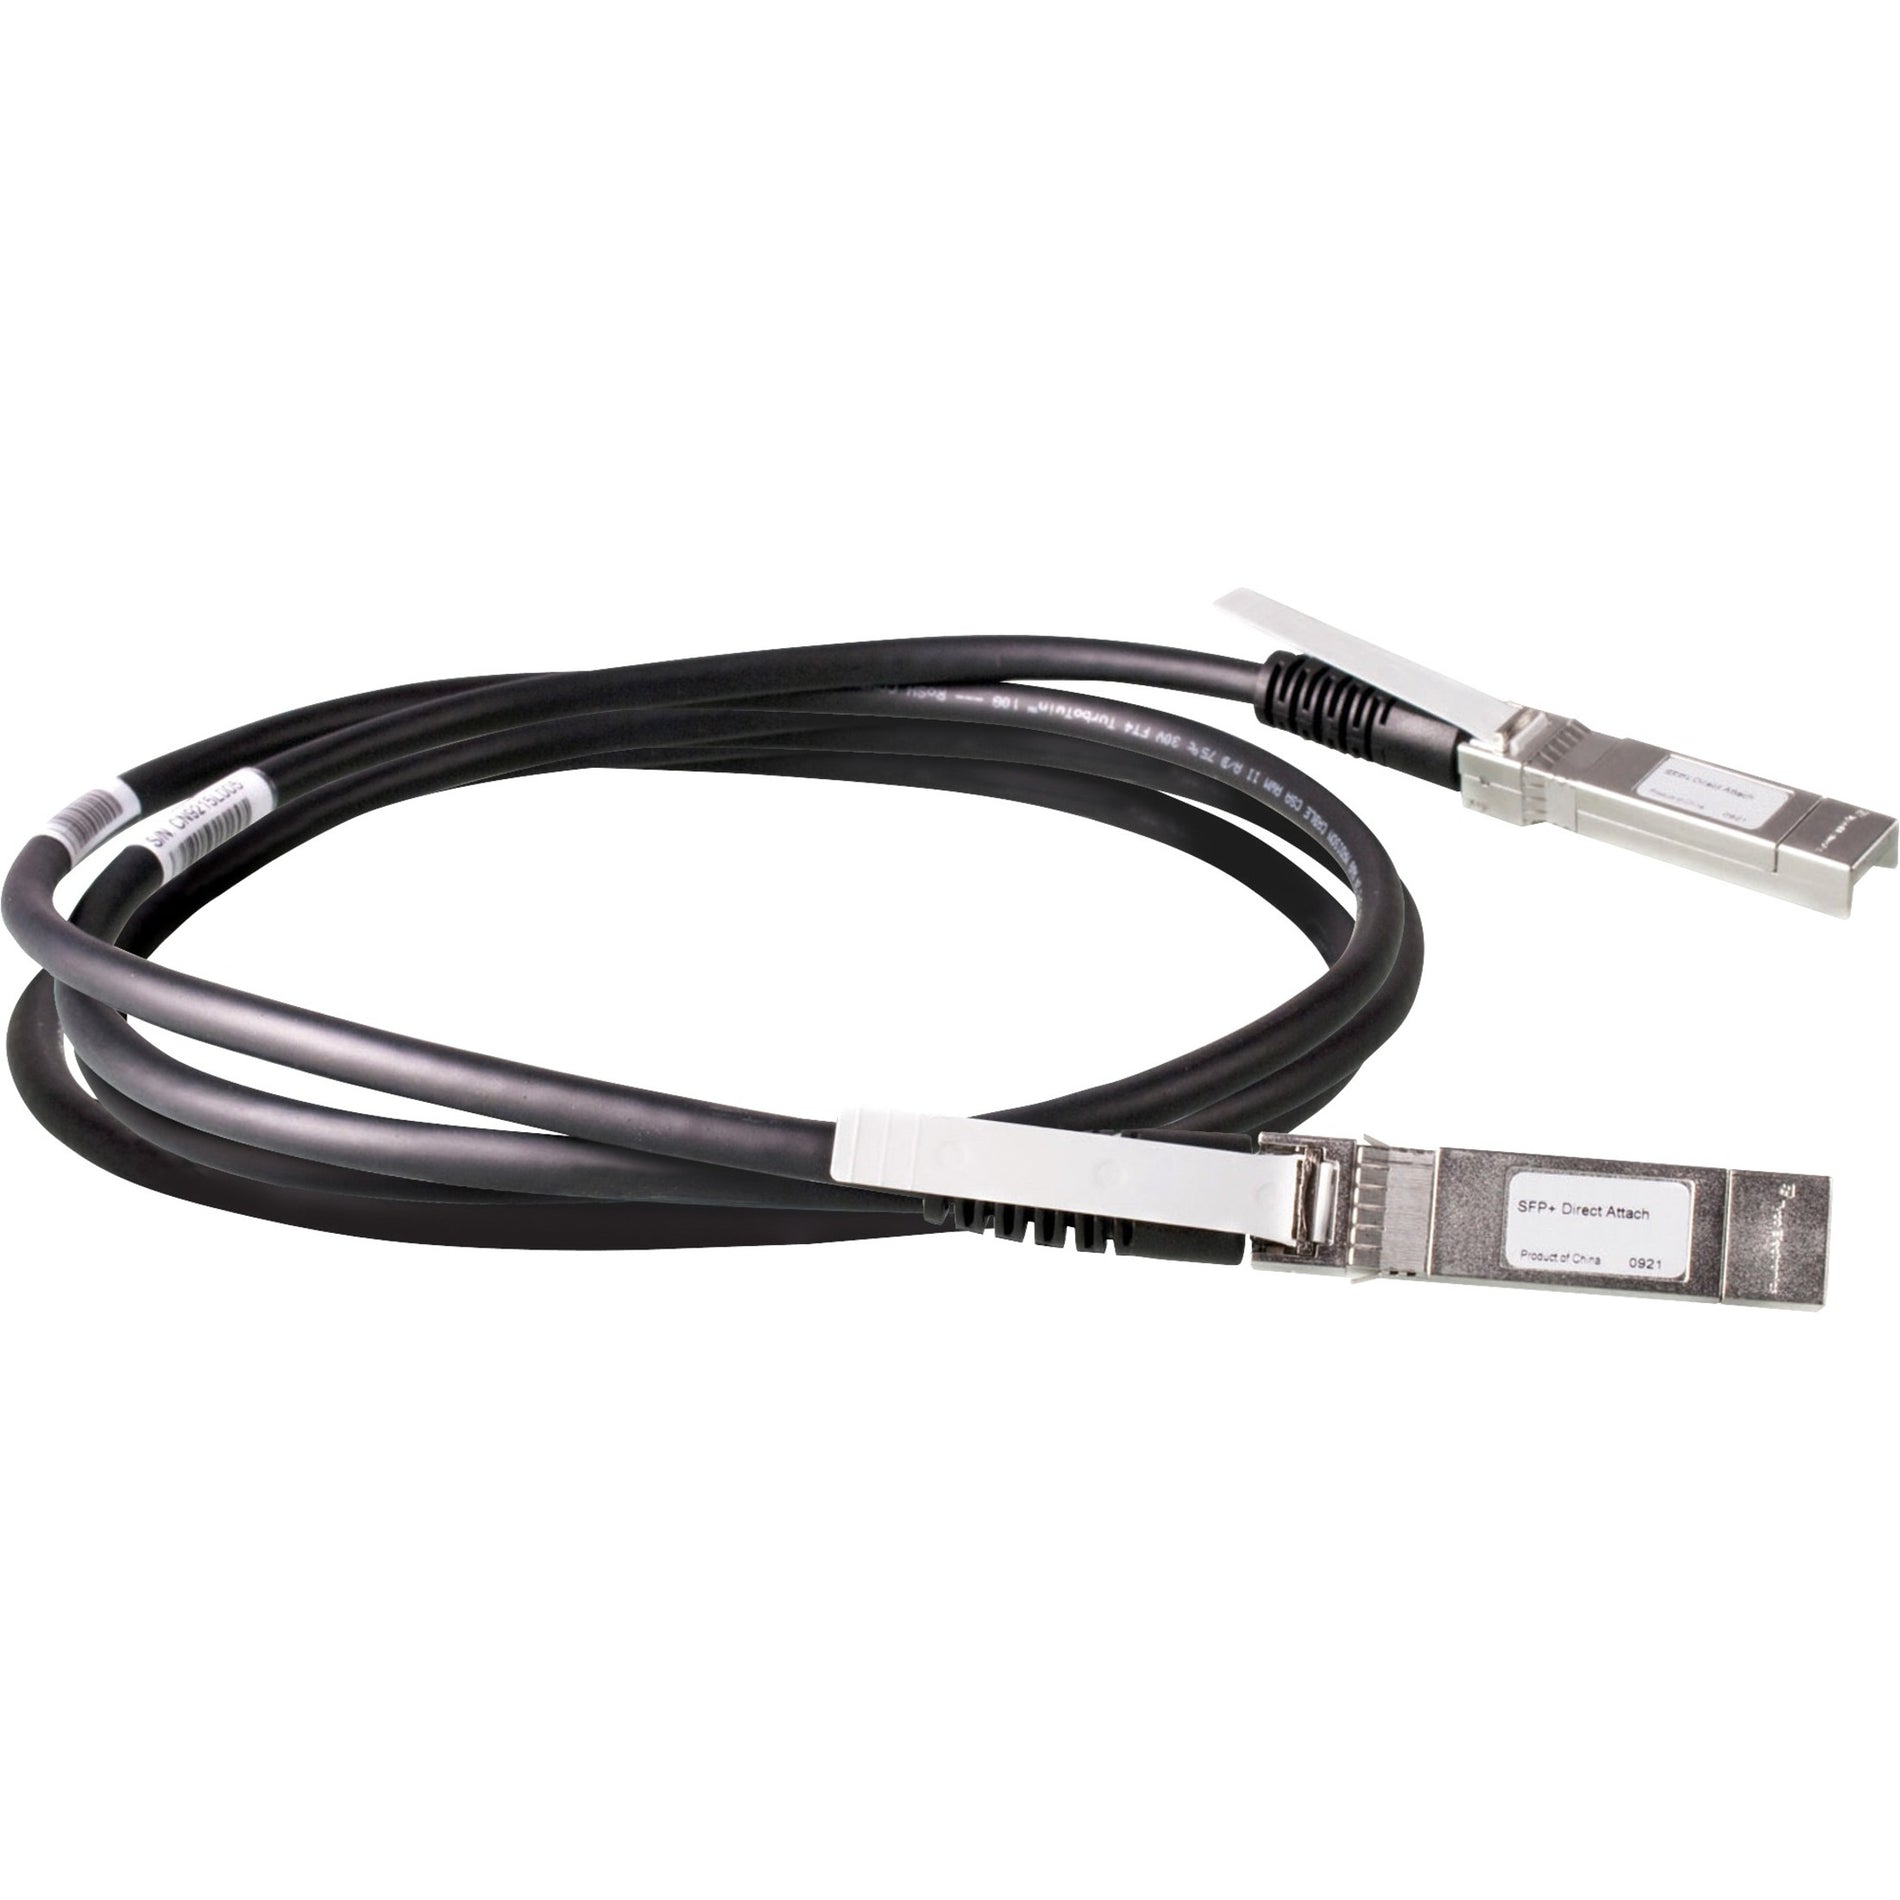 HPE JD097C X240 10G SFP+ SFP+ 3m DAC Cable, High-Speed Network Connection